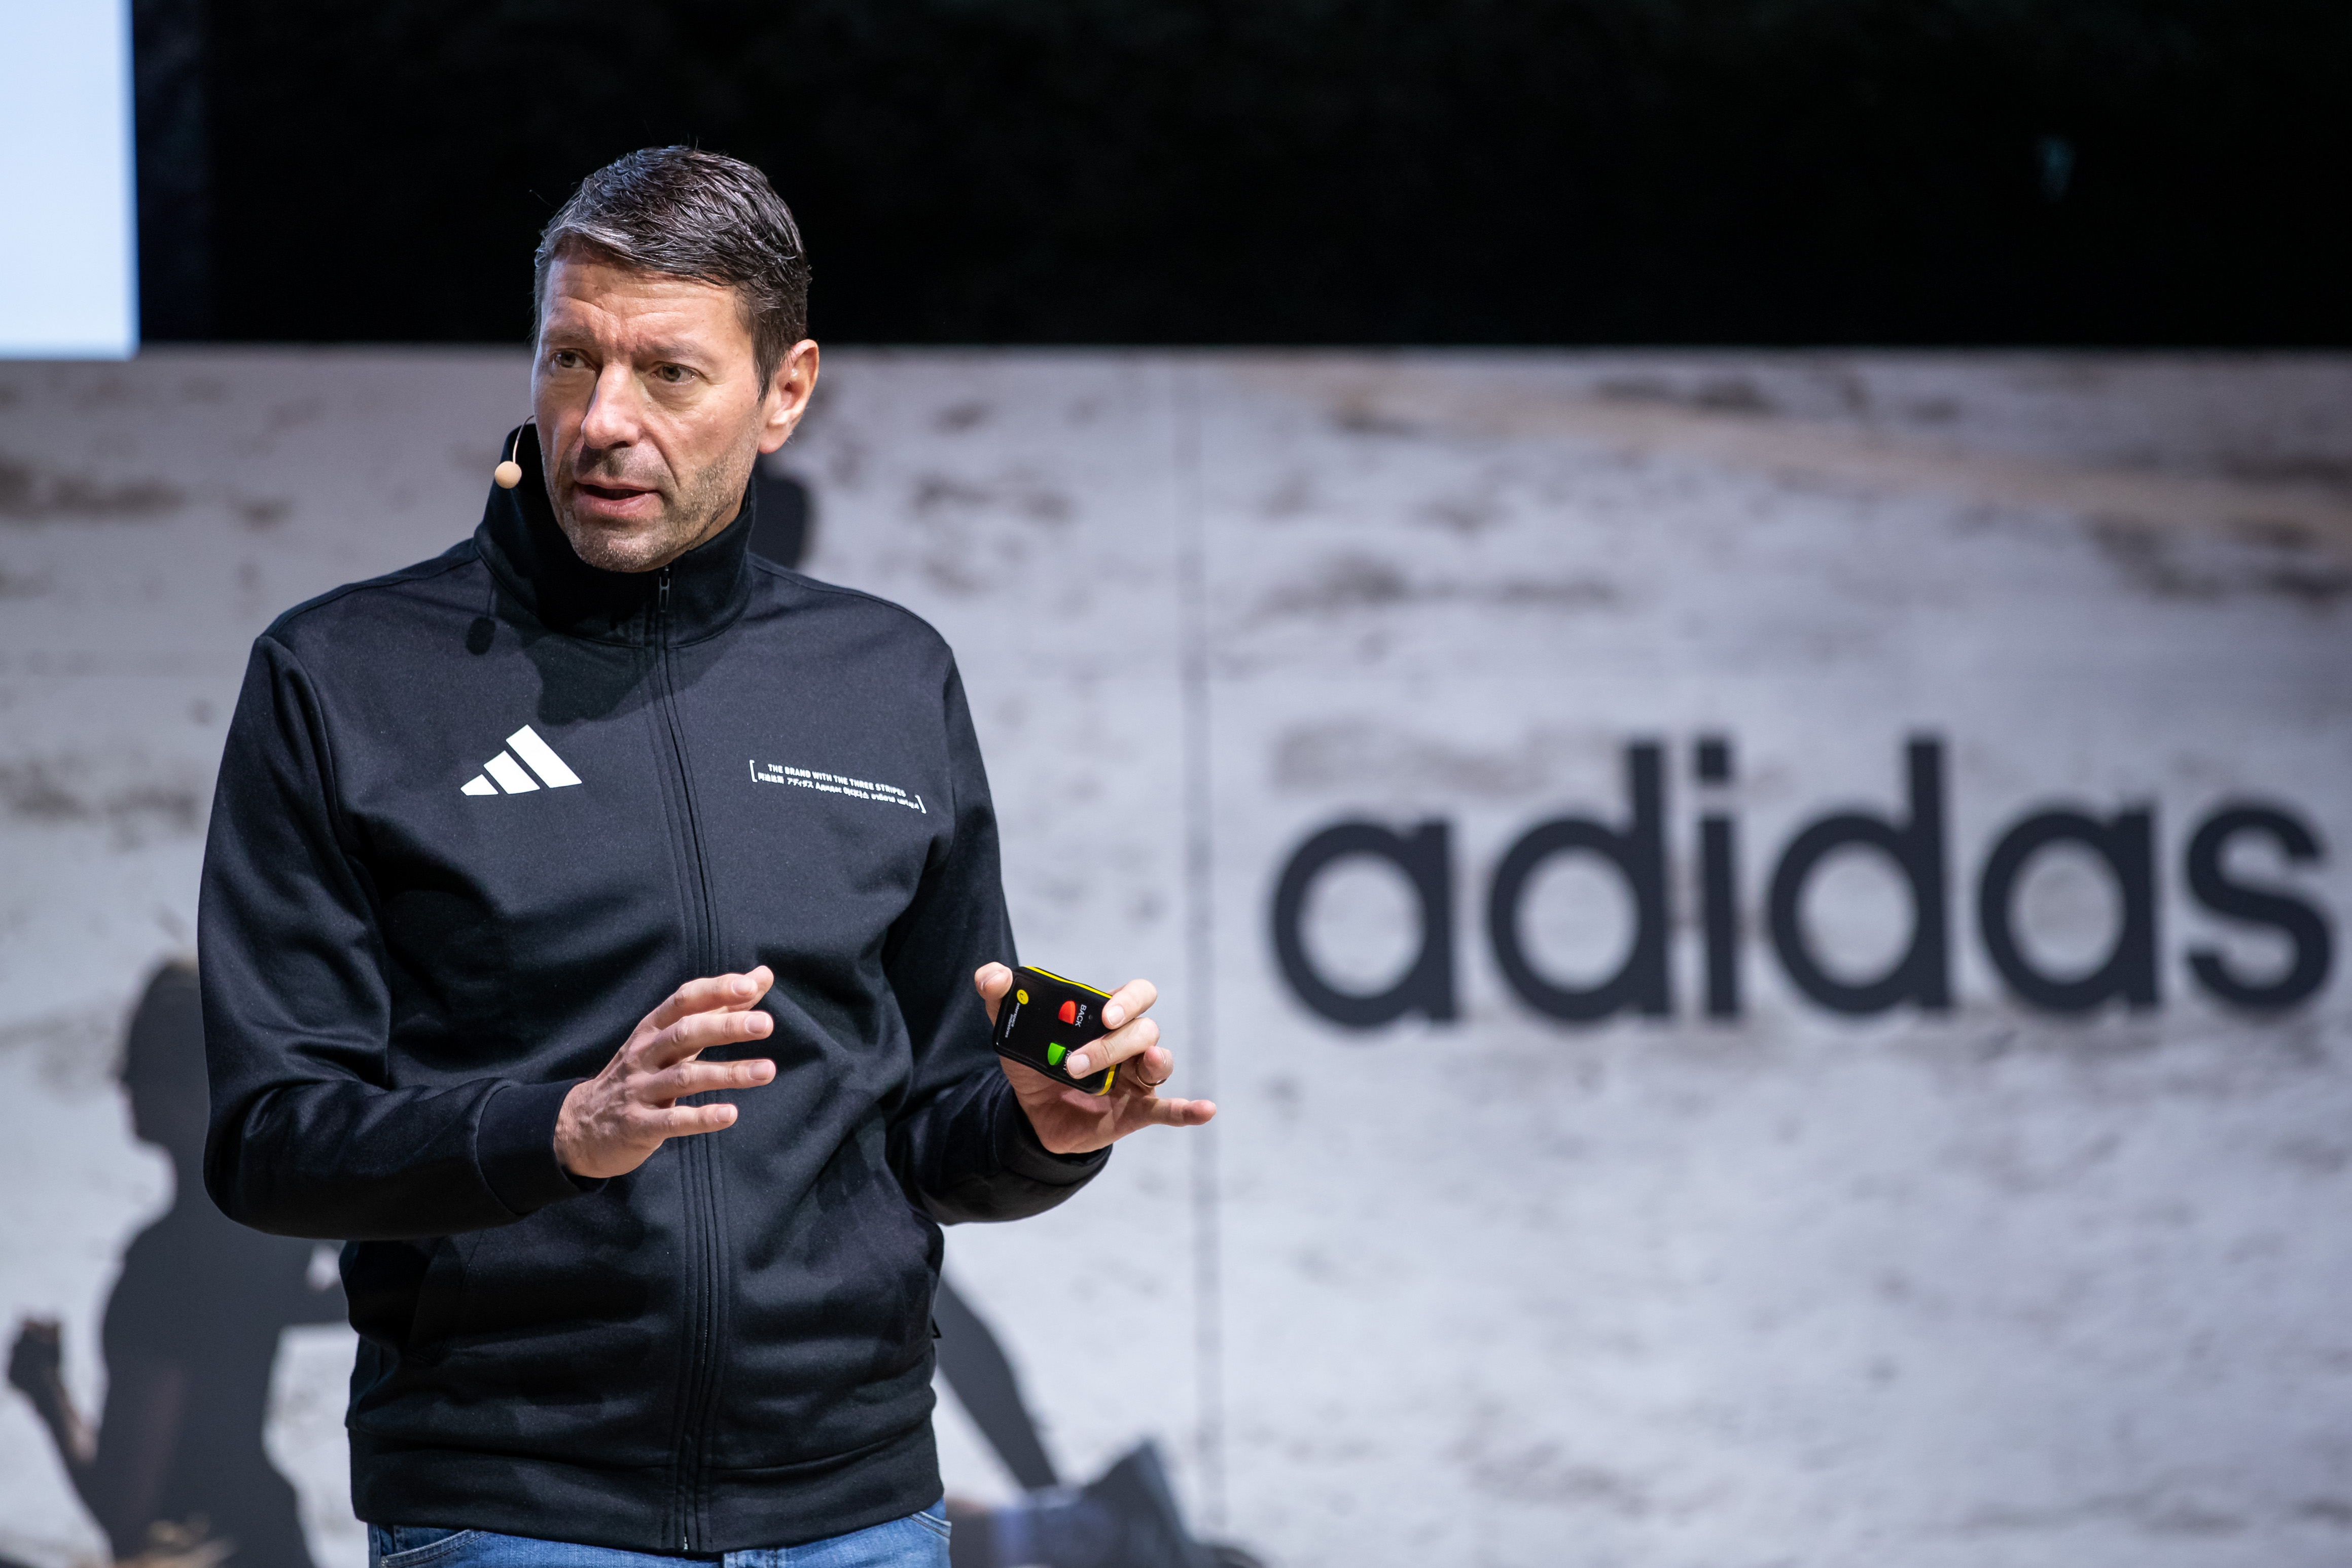 Adidas CEO emailed store employees 